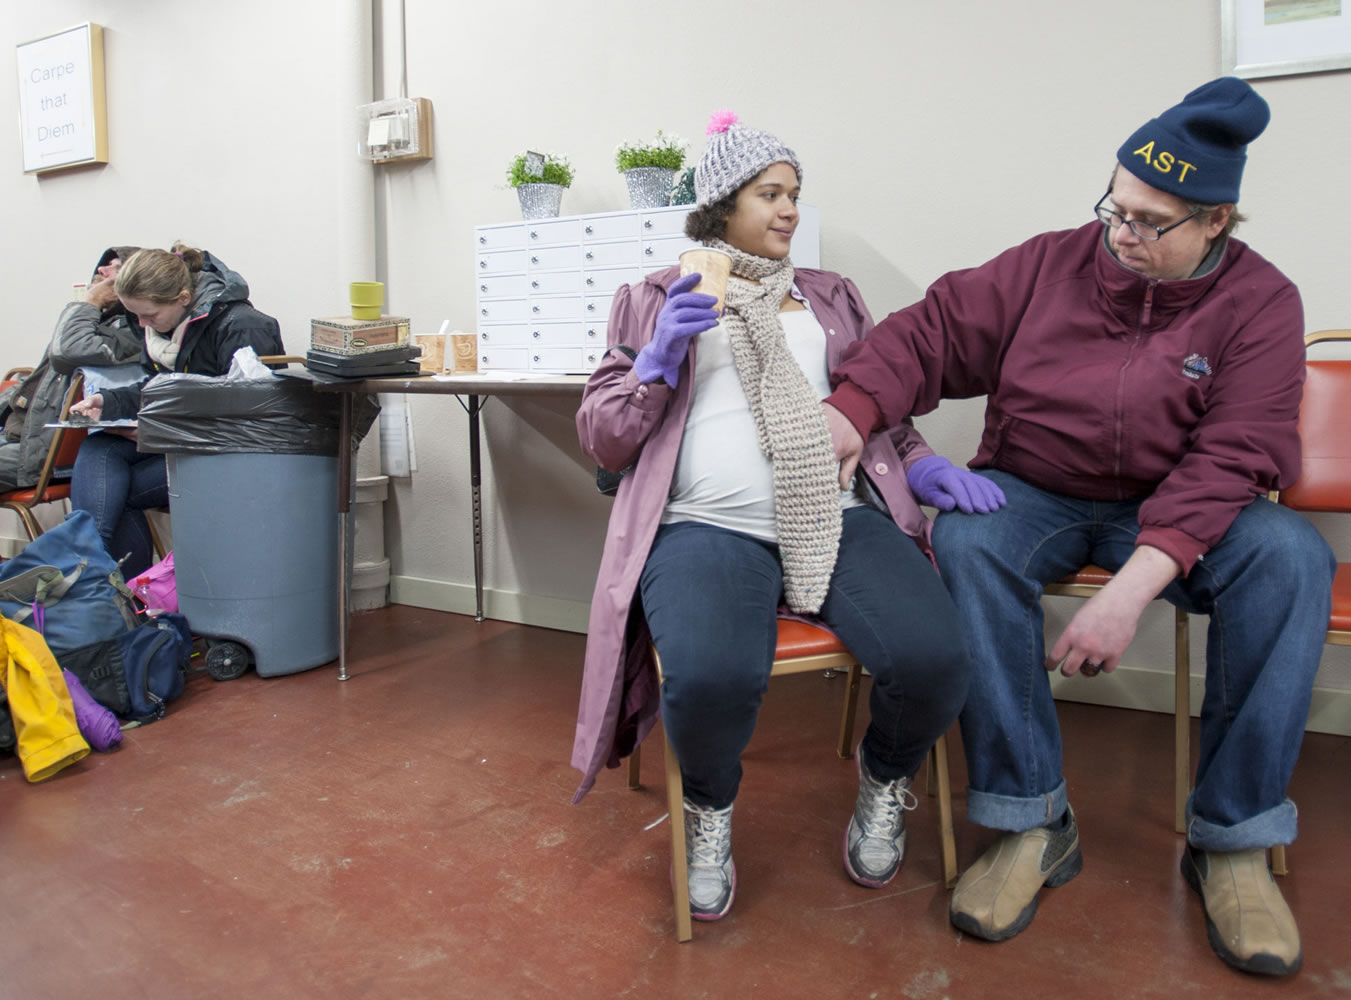 Jay Bohn strokes fiancee Lydia Lane's baby bump Tuesday as they relax at Vancouver's new day center for the homeless at Friends of the Carpenter. The couple, who are expecting a baby in March, said they got engaged Monday.